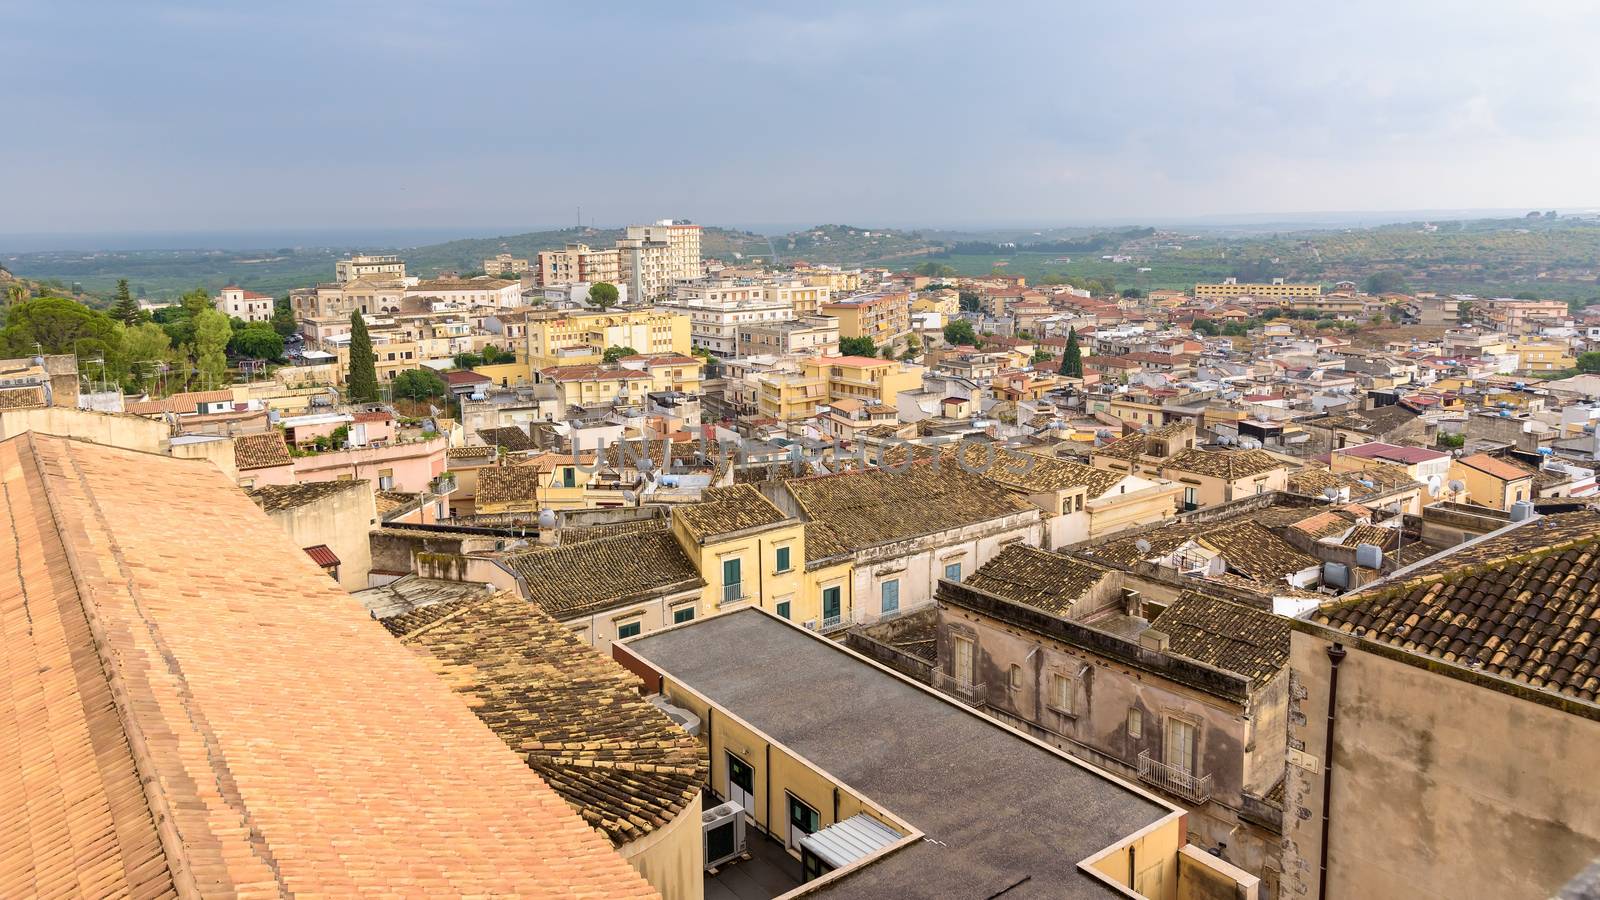 Aerial view of Noto town by mkos83